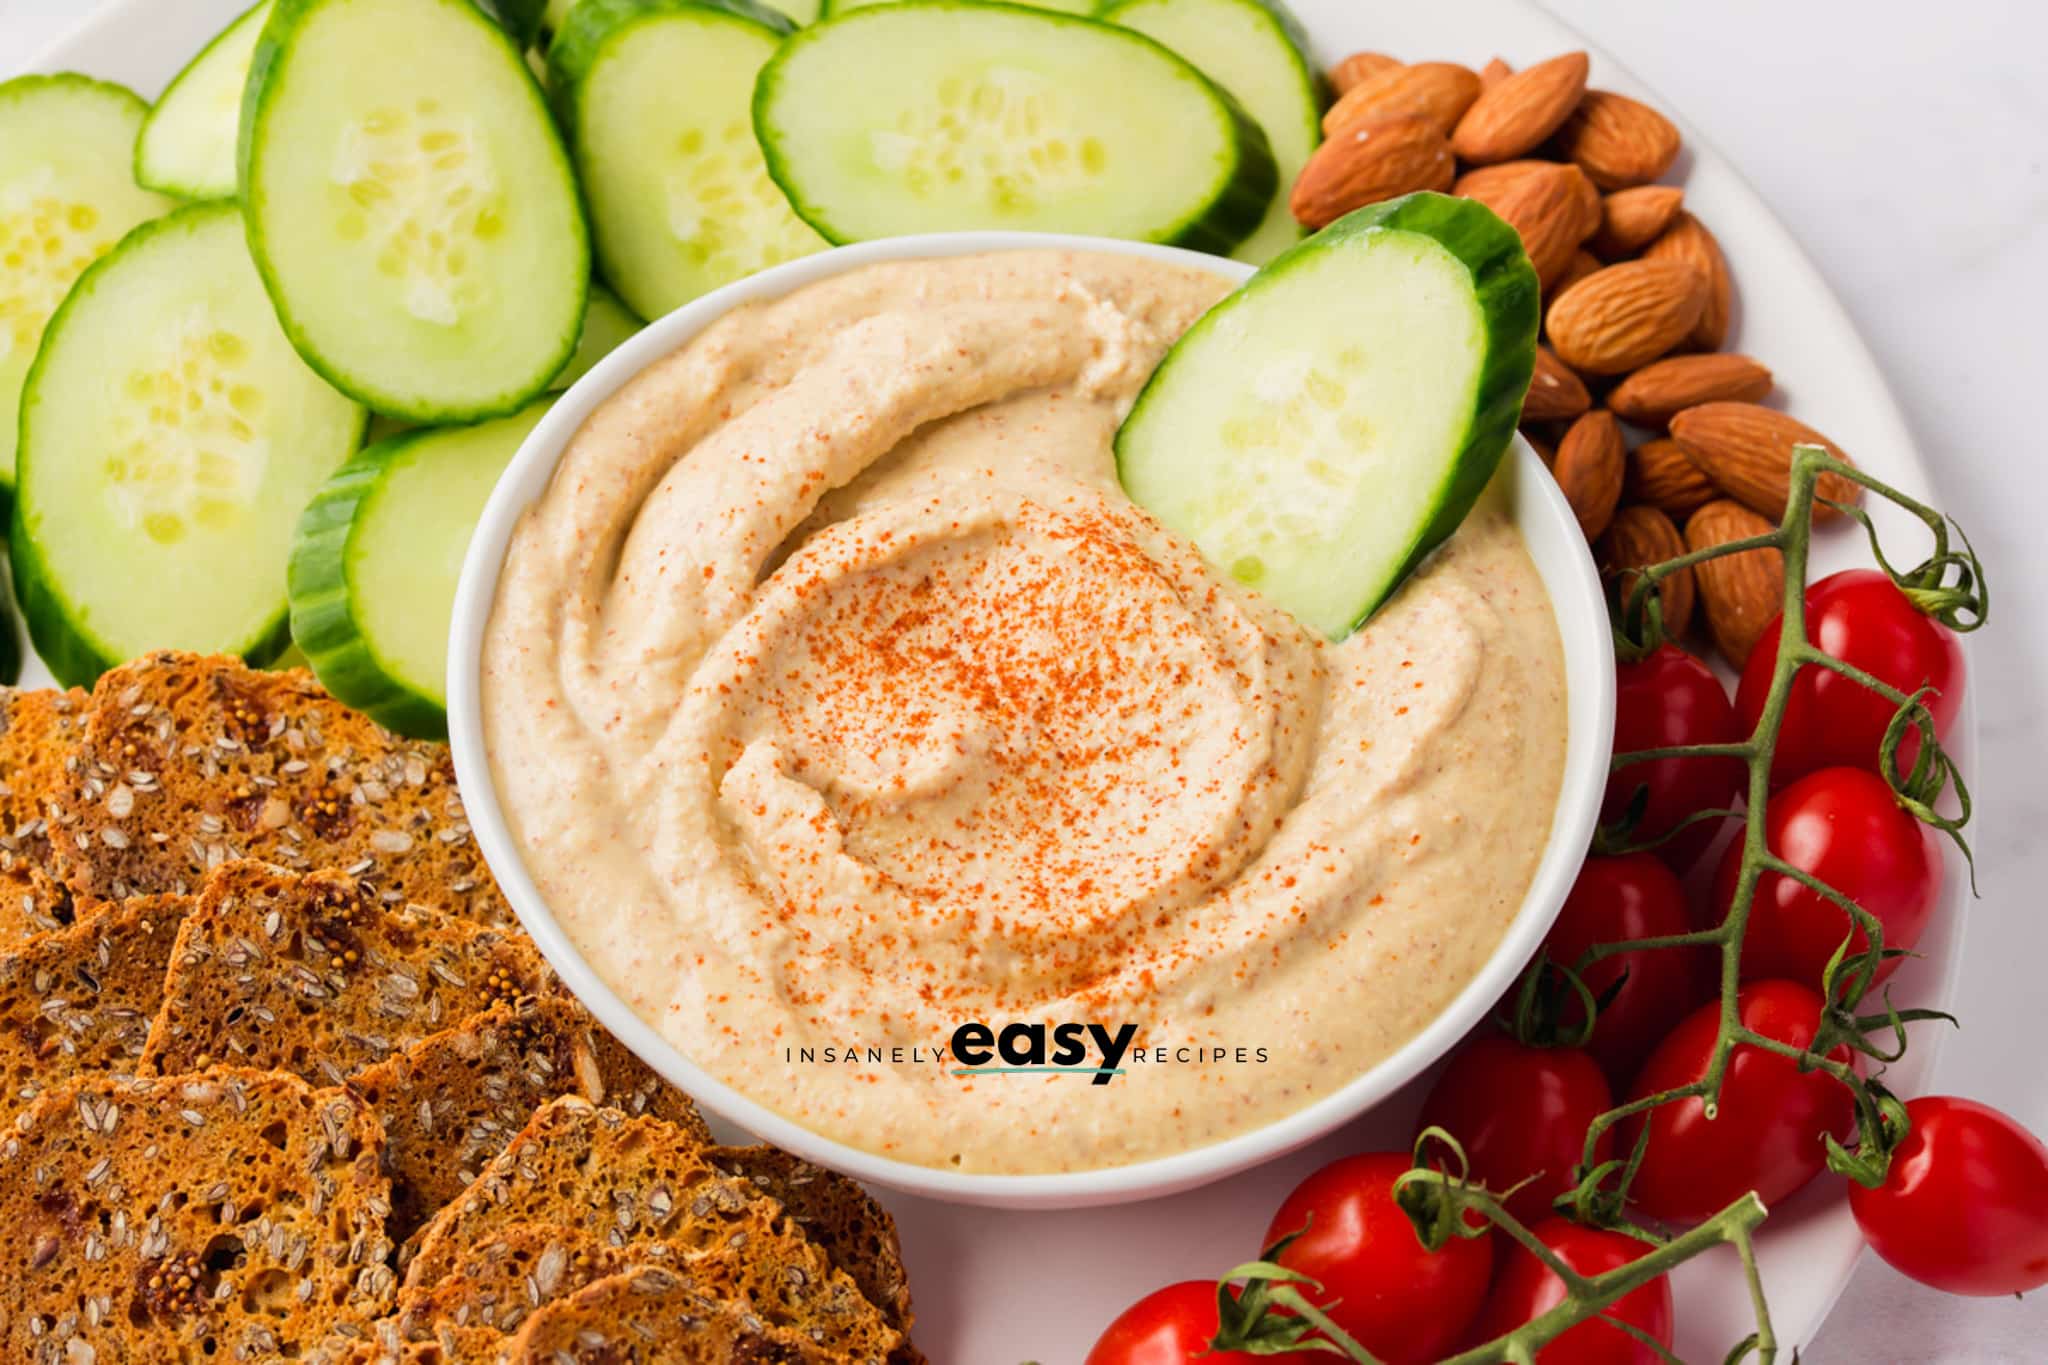 a white bowl of homemade copycat bitchin sauce, swirled with paprika sprinkled on top. almonds, tomatoes, cucumbers, and seed crackers are around the bowl, and there is a cucumber slice in the bowl of dip